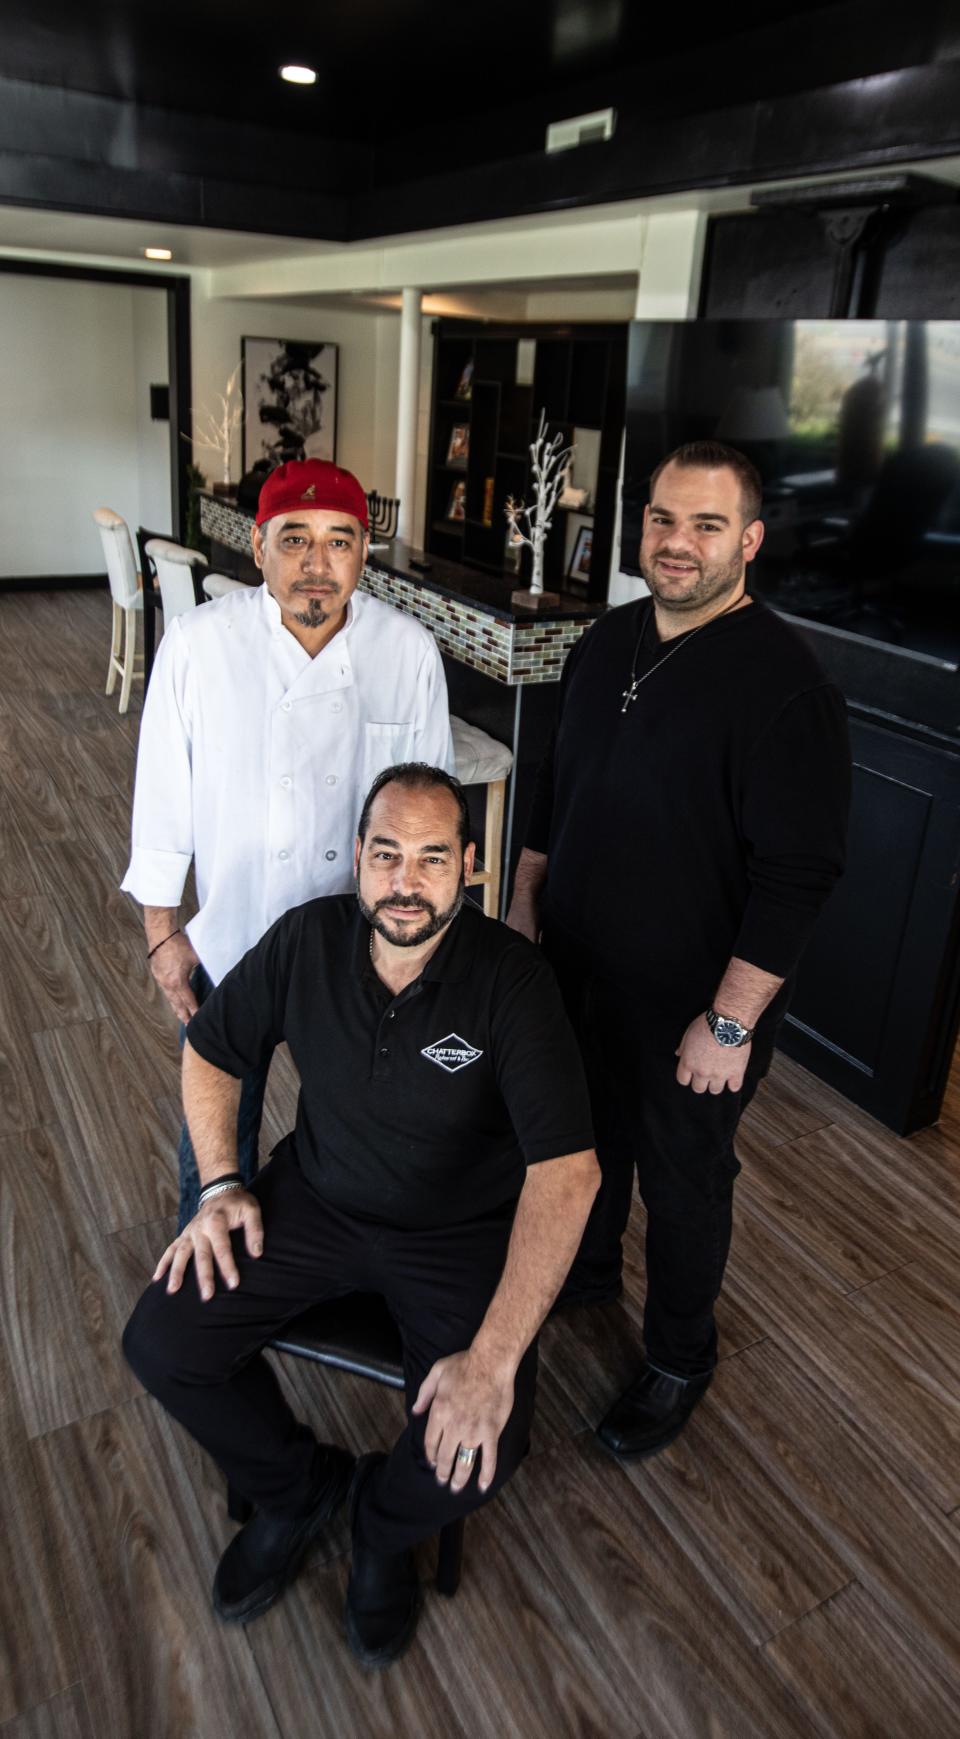 Joseph Pandolfo, seated, owner of Chatterbox Per La Via in Hawthorne, with his son and co-owner Joseph, and chef Pasquale Mango, photographed Nov. 14, 2023.